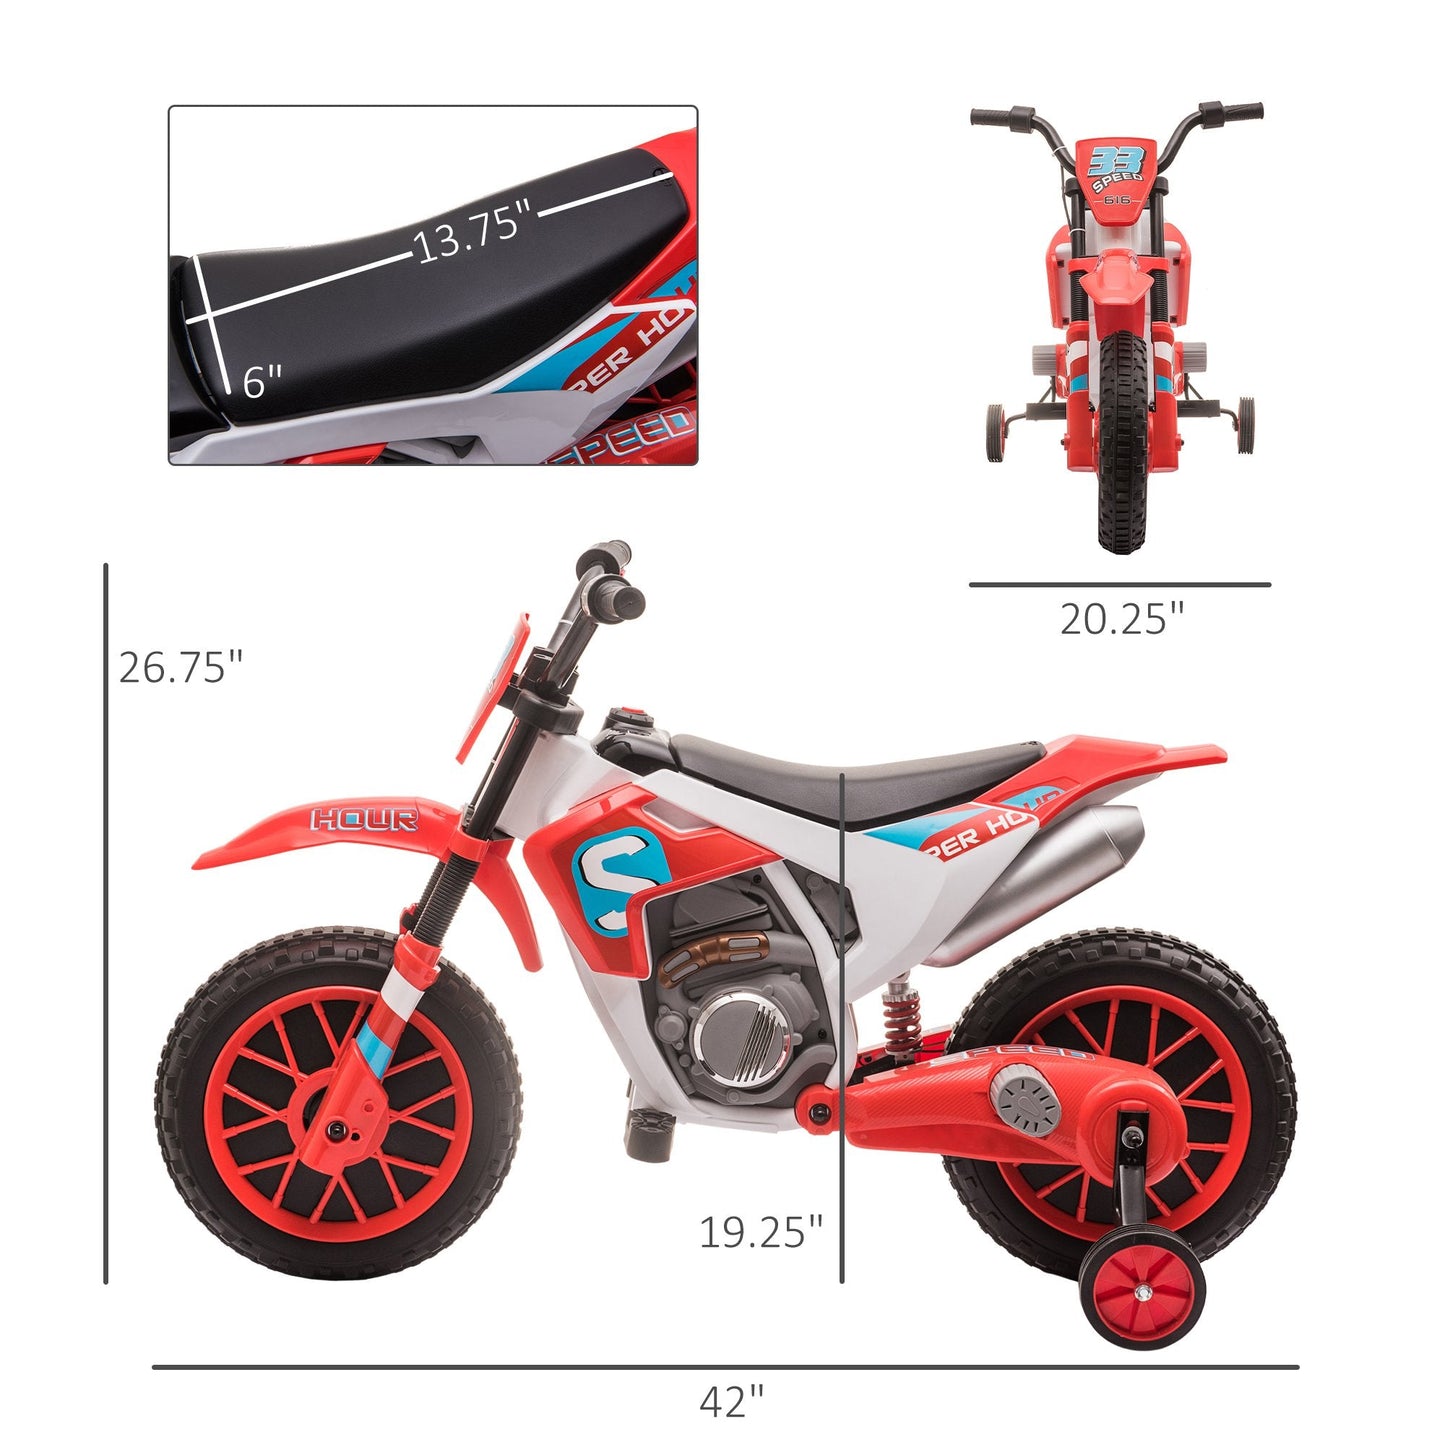 Sports and Fitness-12V Kids Motorcycle Dirt Bike, Electric Battery-Powered Ride-On Toy, Off-road Street Bike with Charging Battery & Training Wheels, Red - Outdoor Style Company